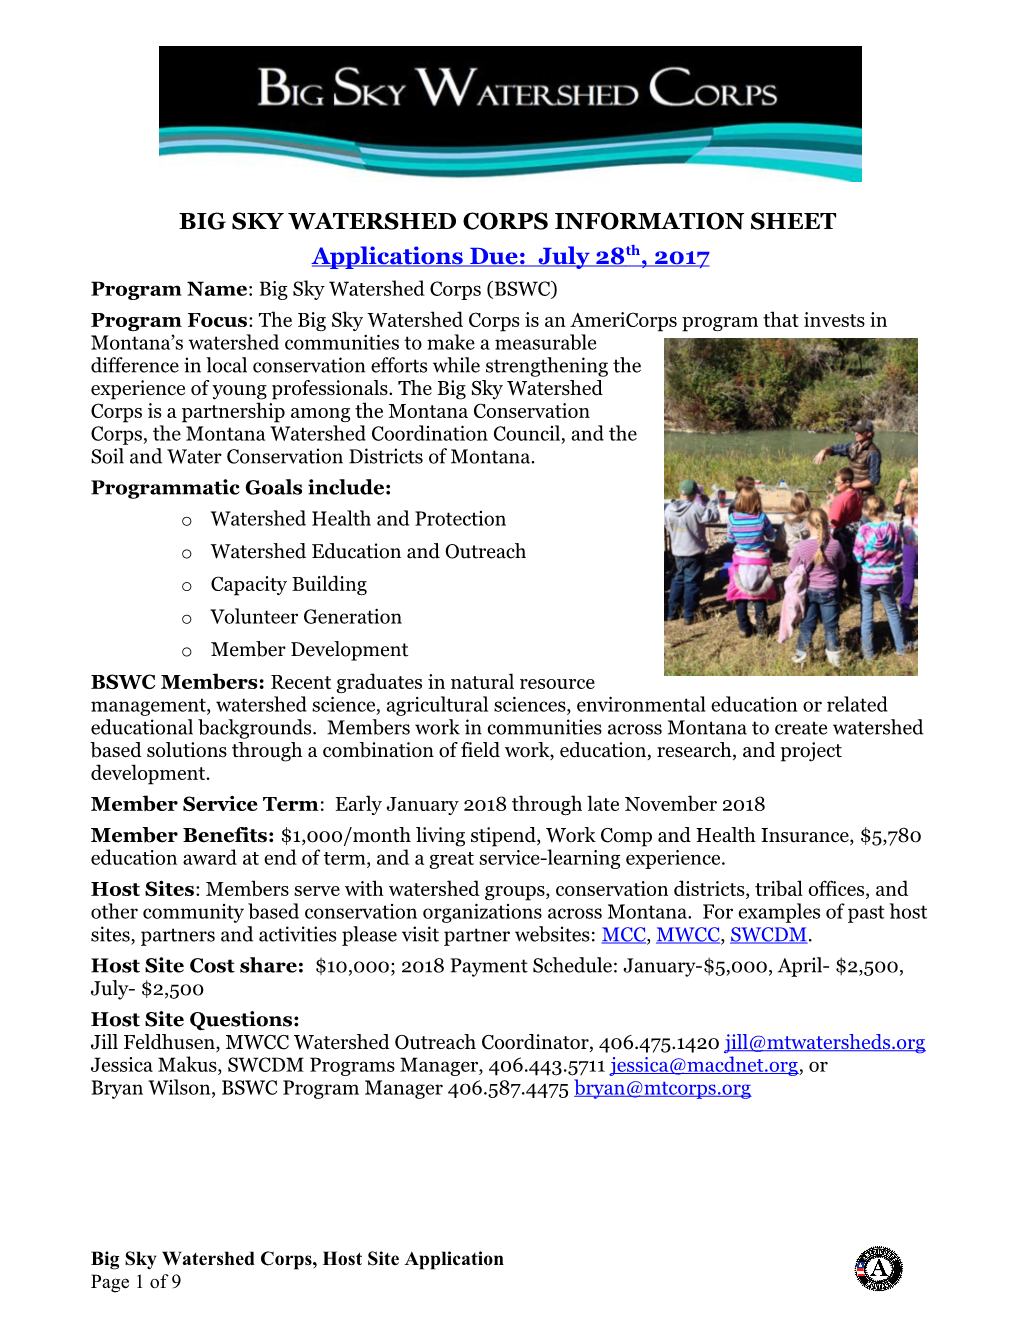 Big Sky Watershed Corps Information Sheet